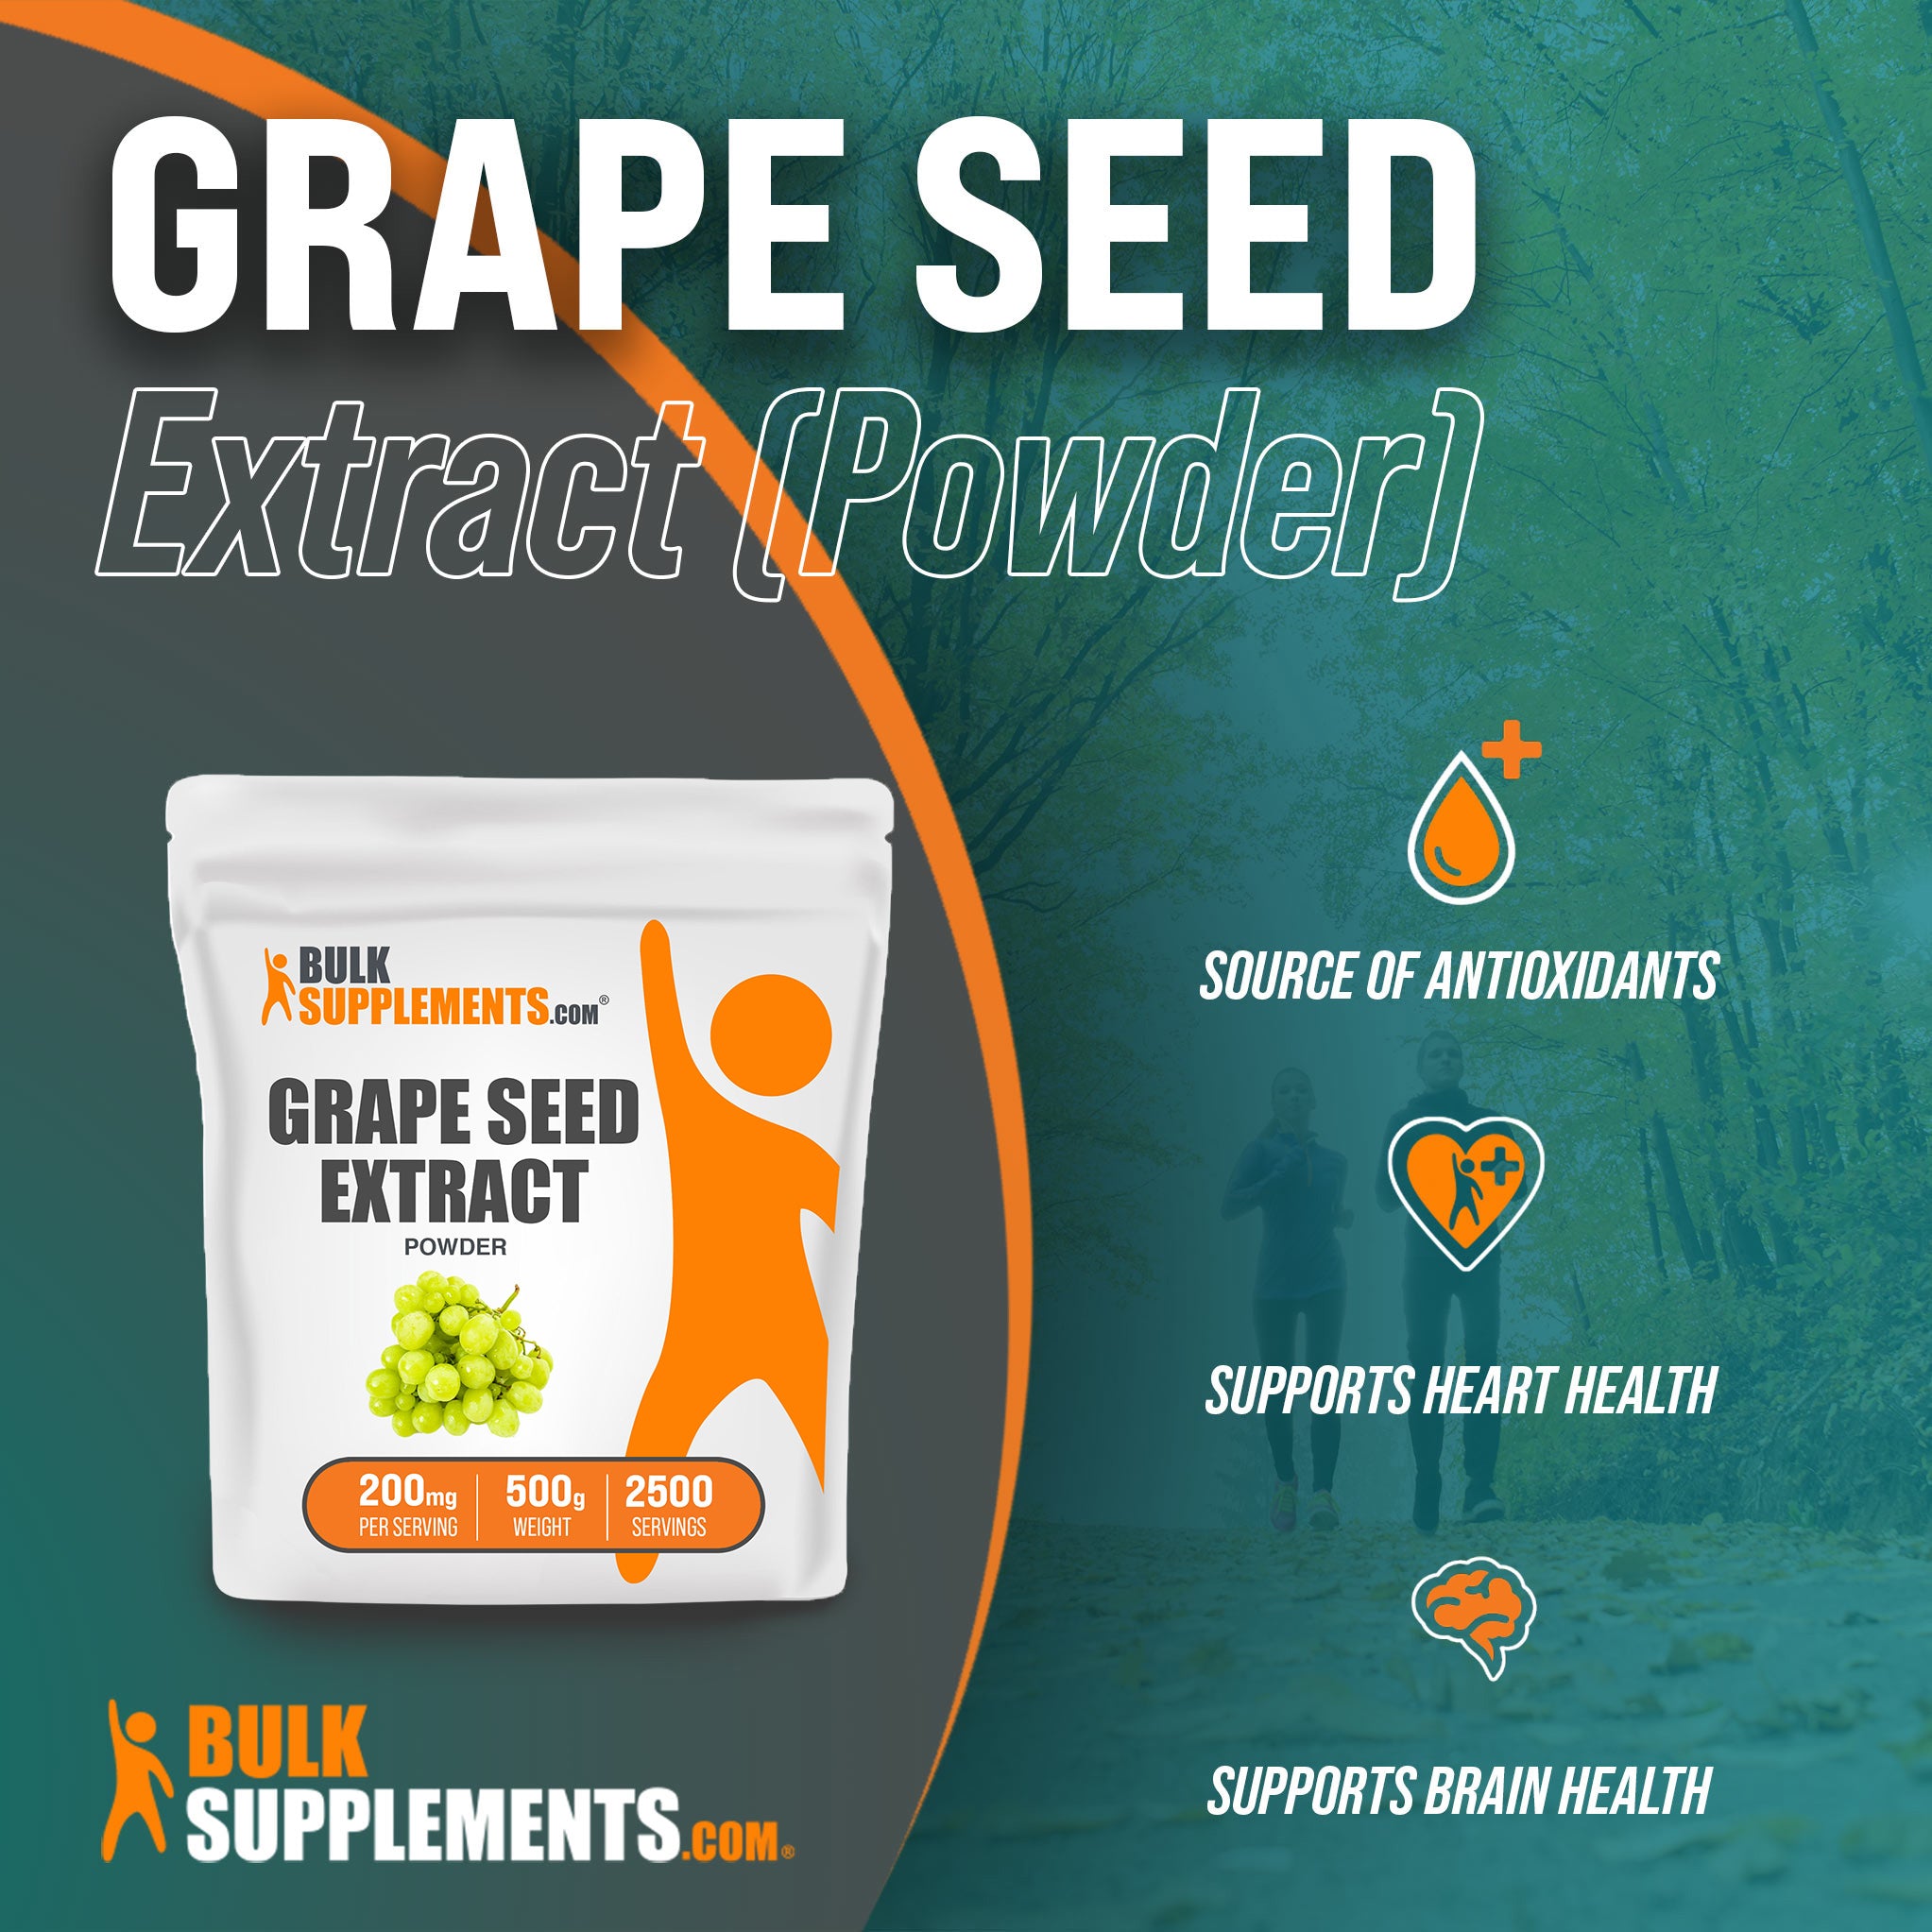 Benefits of Grape Seed Extract; source of antioxidants; supports heart health, supports brain health